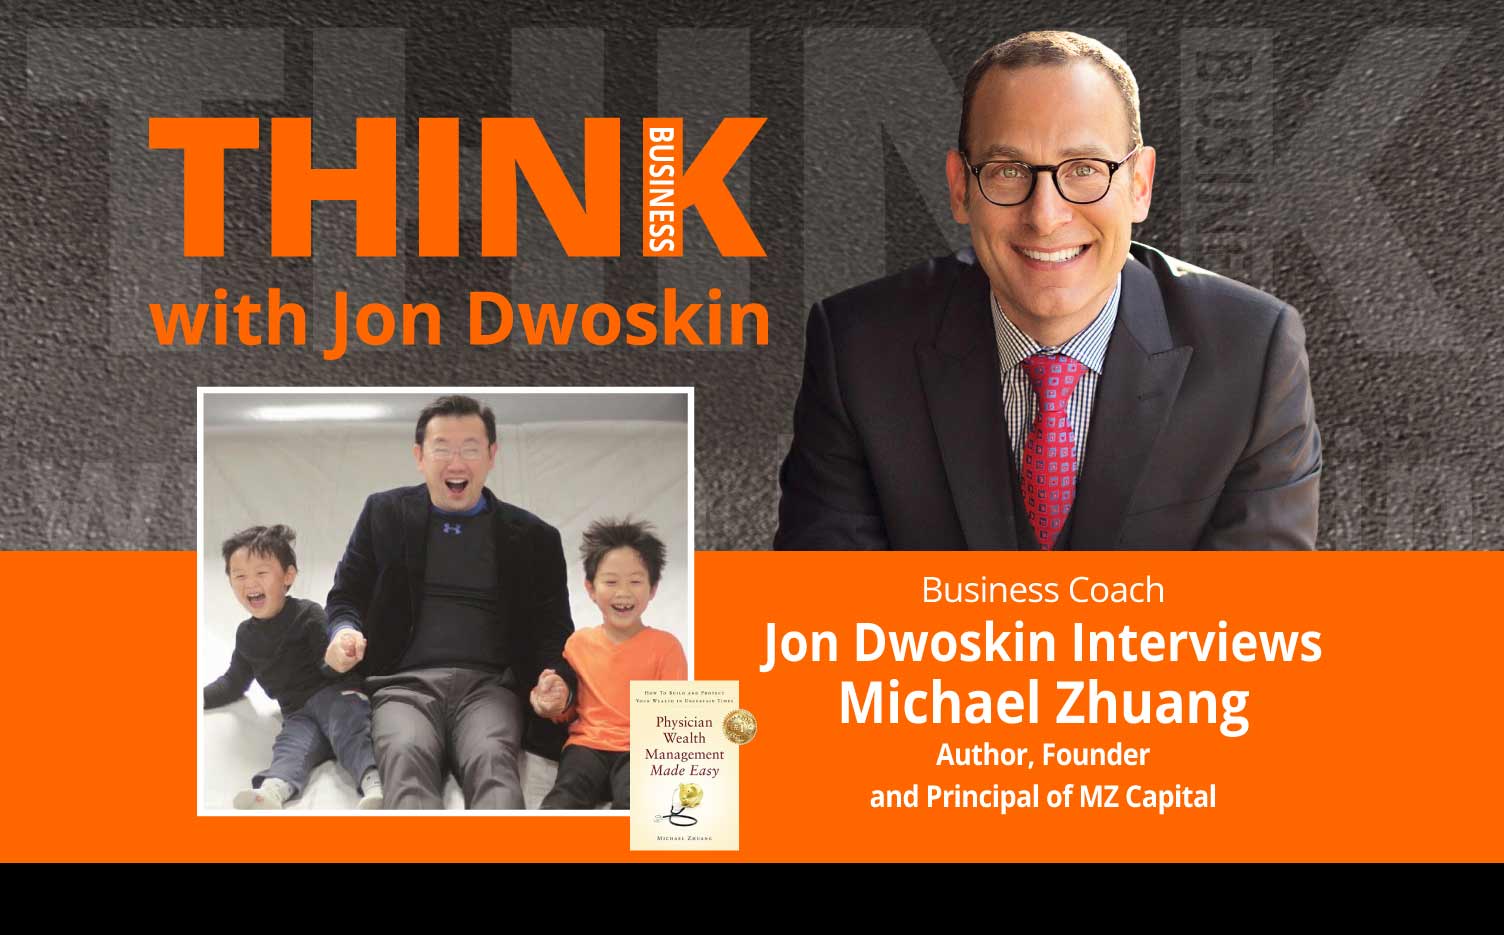 THINK Business Podcast: Jon Dwoskin Interviews Michael Zhuang, Author, Founder and Principal of MZ Capital